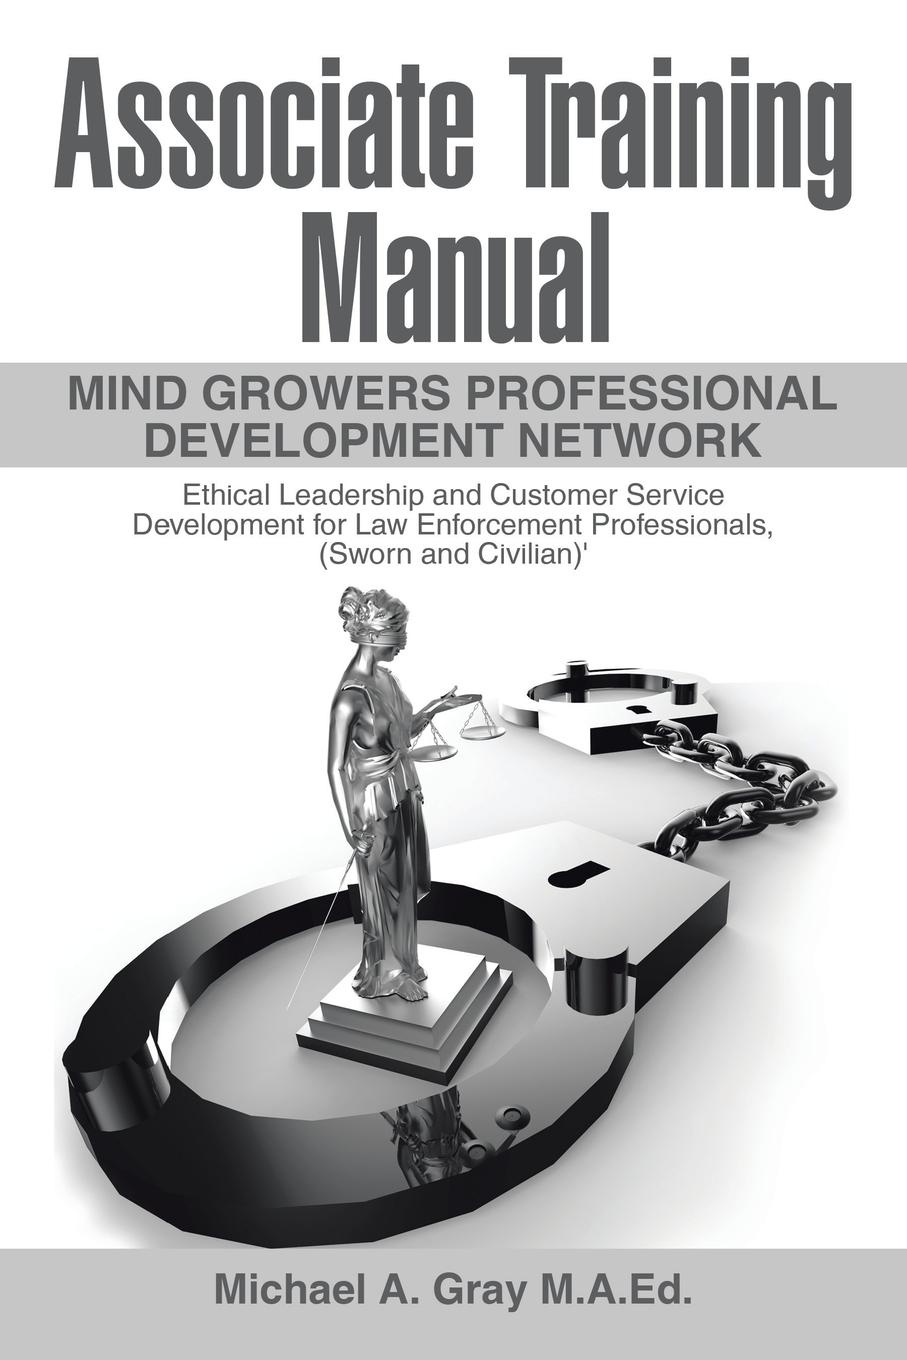 Associate Training Manual. Ethical Leadership and Customer Service Development for Law Enforcement Professionals, (Sworn and Civilian)